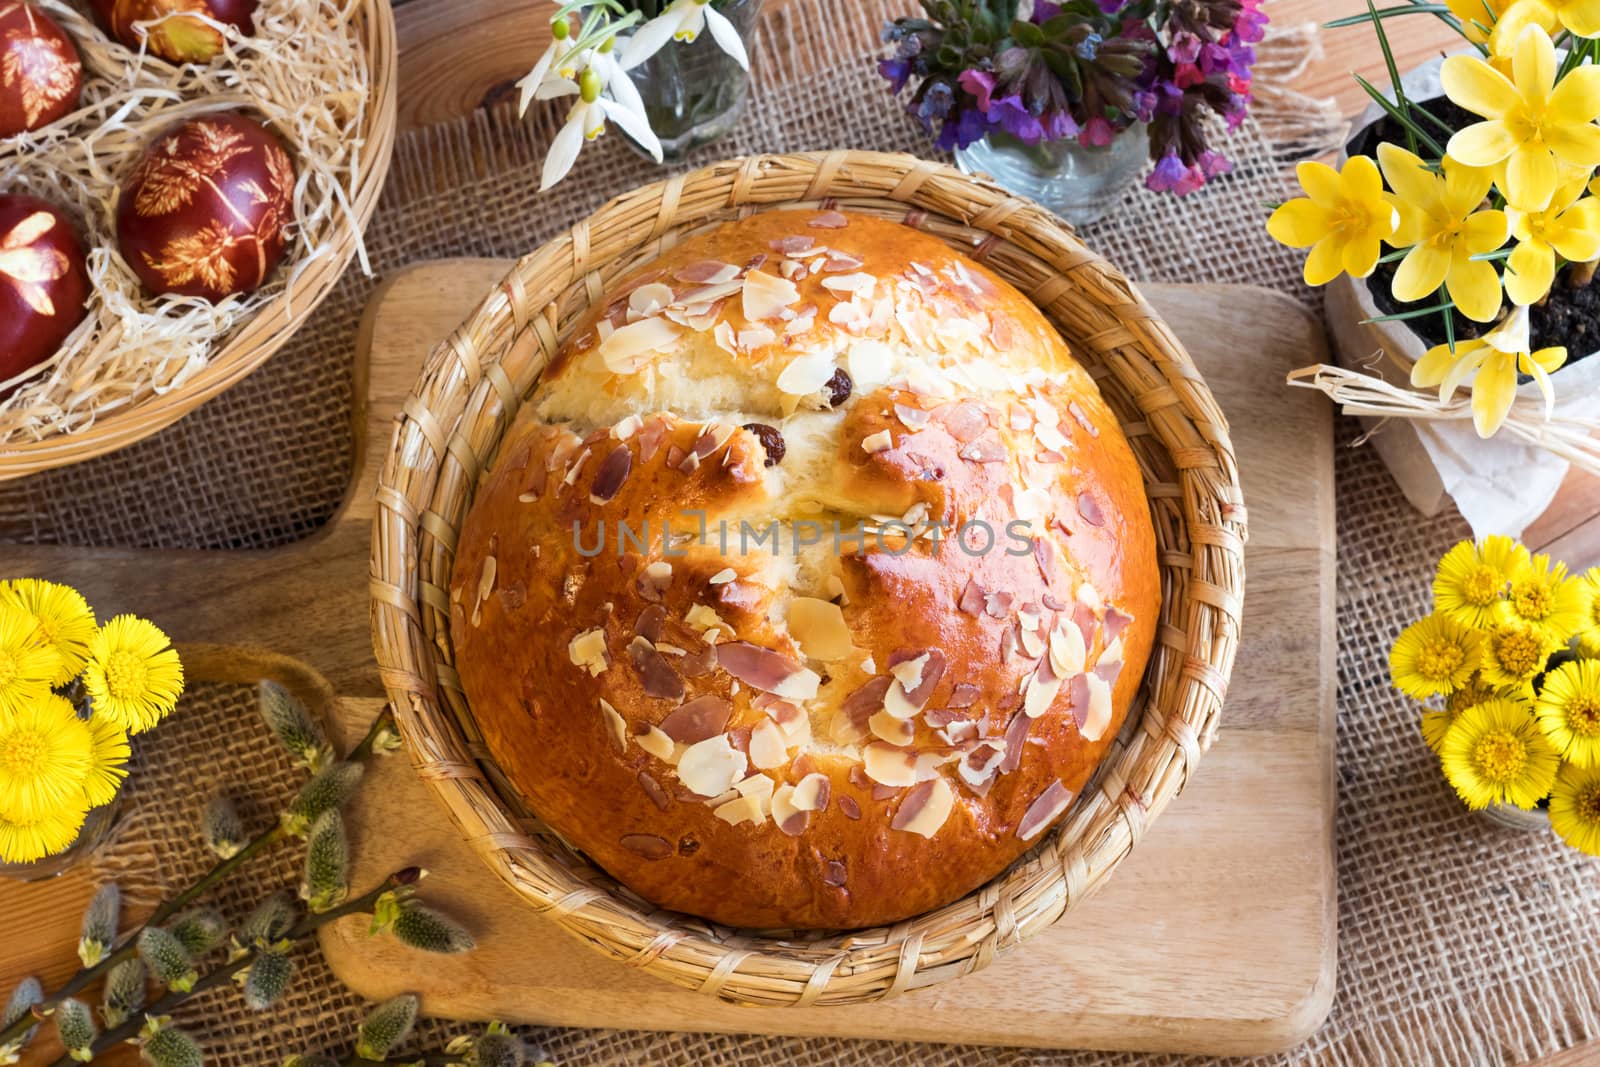 Mazanec, traditional Czech Easter pastry, similar to hot cross bun, with snowdrops, lungwort, coltsfoot, pussy willow, yellow crocuses and easter eggs dyed with onion peels. Top view.